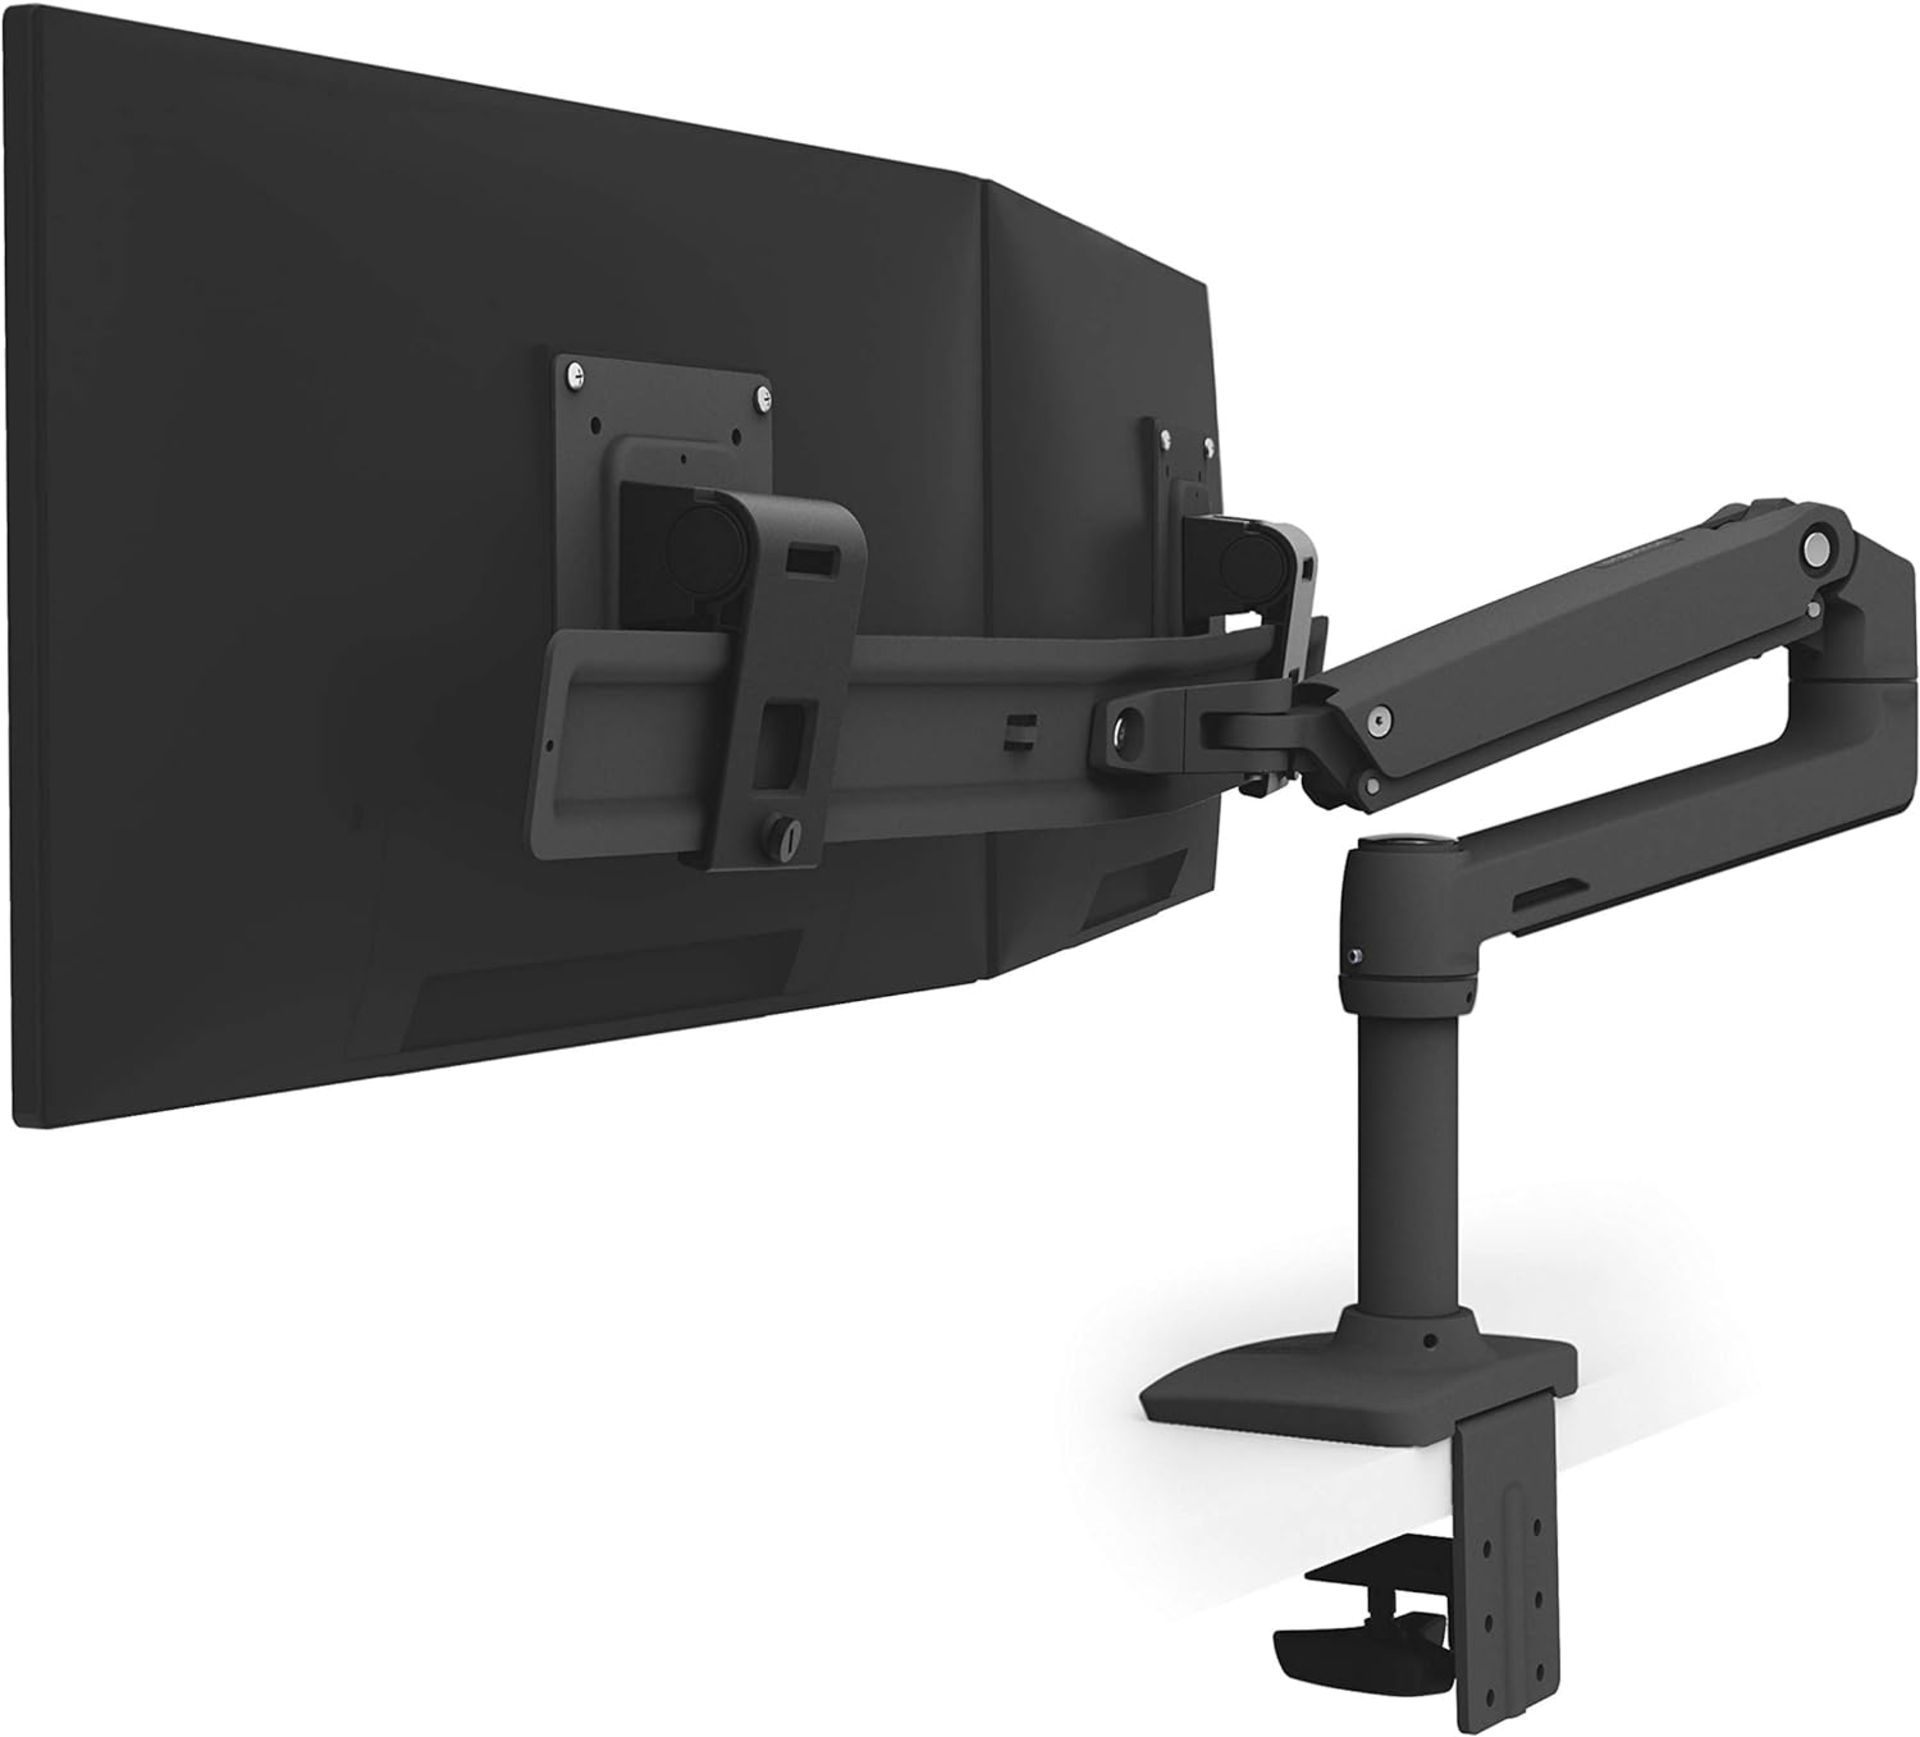 NEW & BOXED ERGOTRON LX - Mounting kit (articulating arm, 2 pivots, dual displays bow, base, 2-piece